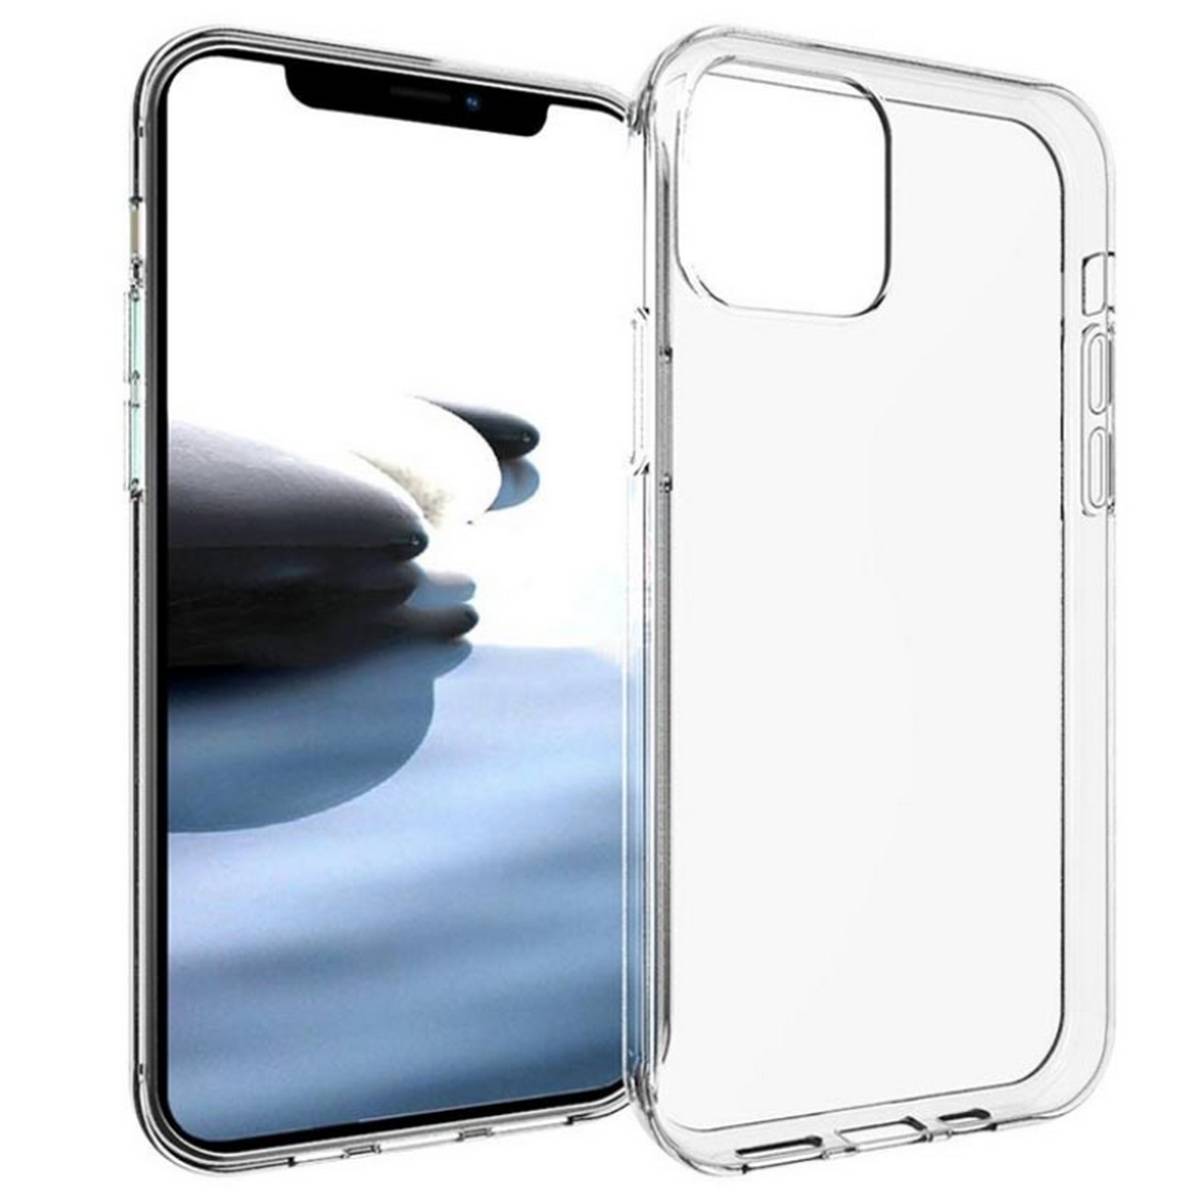 Transparent cover for iphone 12 pro max-image